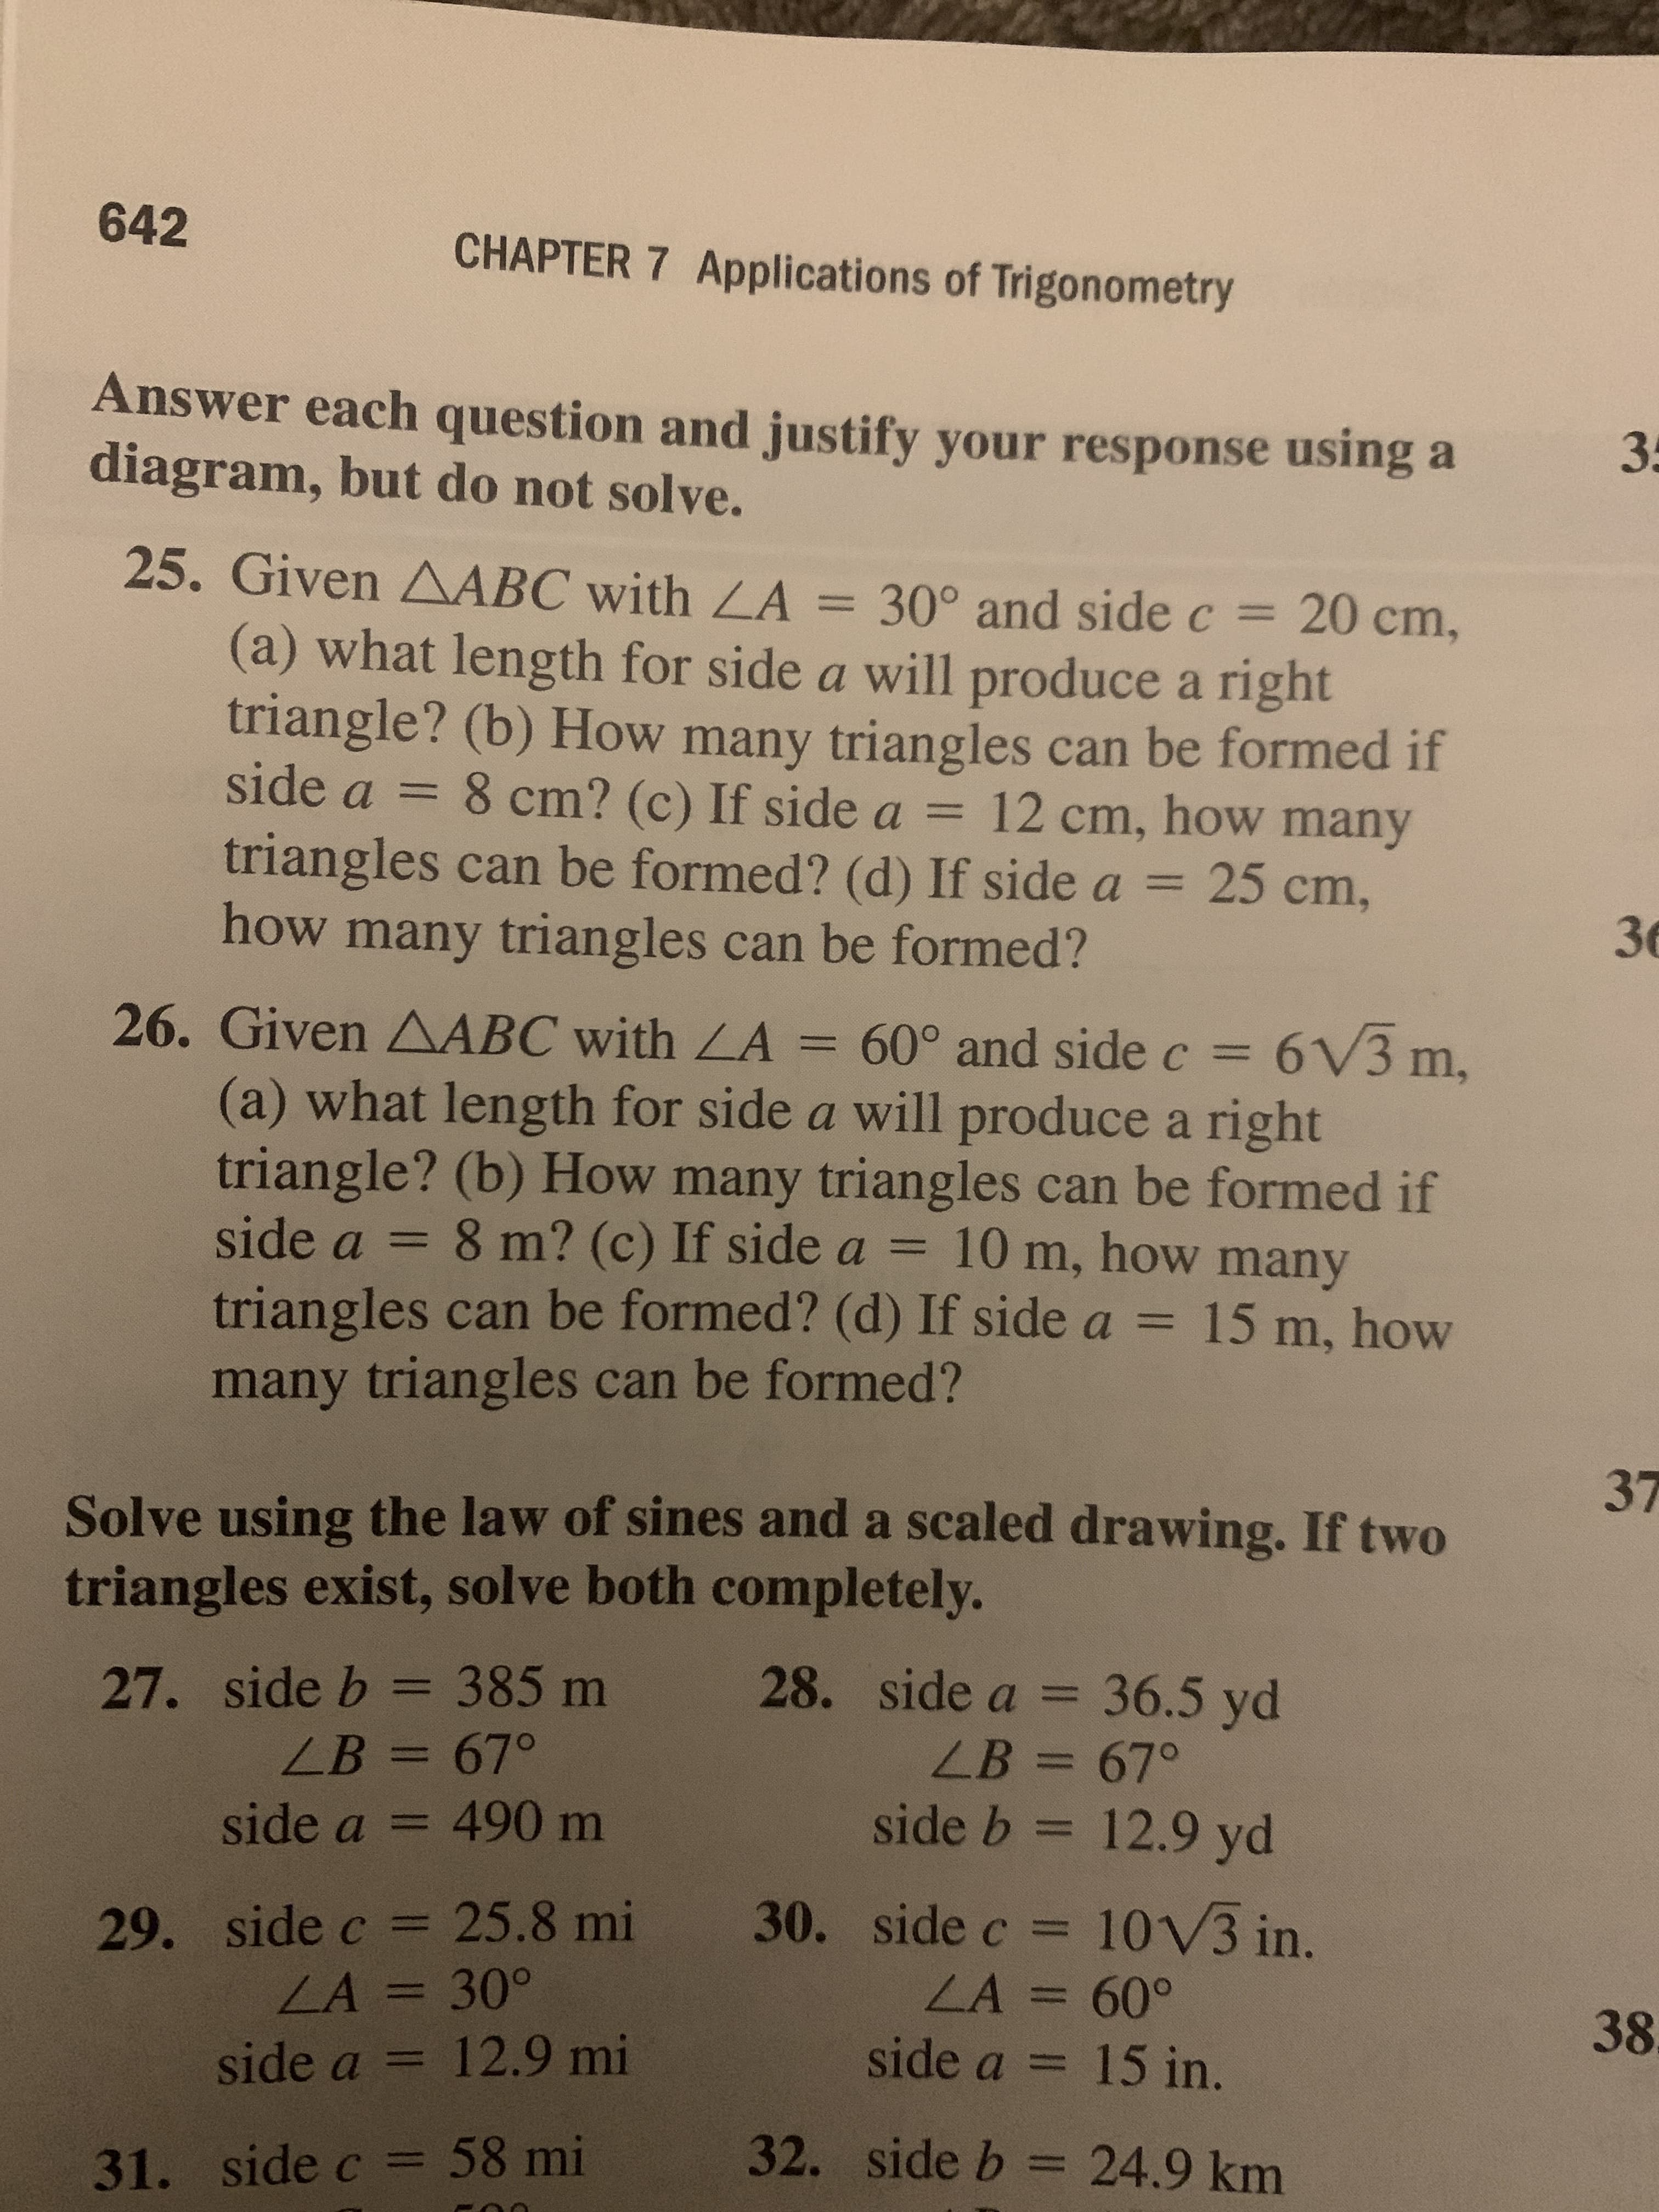 642
CHAPTER 7 Applications of Trigonometry
Answer each question and justify your response using a
diagram, but do not solve.
35
25. Given AABC with LA
= 30° and side c =
20cm,
%3D
%3D
(a) what length for side a will produce a right
triangle? (b) How many triangles can be formed if
side a = 8 cm? (c) If side a = 12 cm, how many
%3D
triangles can be formed? (d) If side a =
25cm,
%3D
36
how many triangles can be formed?
26. Given AABC with LA = 60° and side c = 6V3 m,
= 6V3
%3D
(a) what length for side a will produce a right
triangle? (b) How many triangles can be formed if
side a = 8 m? (c) If side a = 10 m, how many
triangles can be formed? (d) If side a = 15 m, how
%3D
%3D
many triangles can be formed?
37
Solve using the law of sines and a scaled drawing. If two
triangles exist, solve both completely.
27. side b = 385 m
28. side a = 36.5 yd
%3D
ZB=67°
LB =67°
%3D
%3D
side a = 490 m
side b = 12.9 yd
%3D
%3D
30. side c = 10V3 in.
29. side c = 25.8 mi
LA = 30°
%3D
%3D
LA=60°
side a = 15 in.
%3D
38
%3D
%3D
side a = 12.9 mi
32. side b = 24.9 km
%3D
%3D
31. side c = 58 mi
